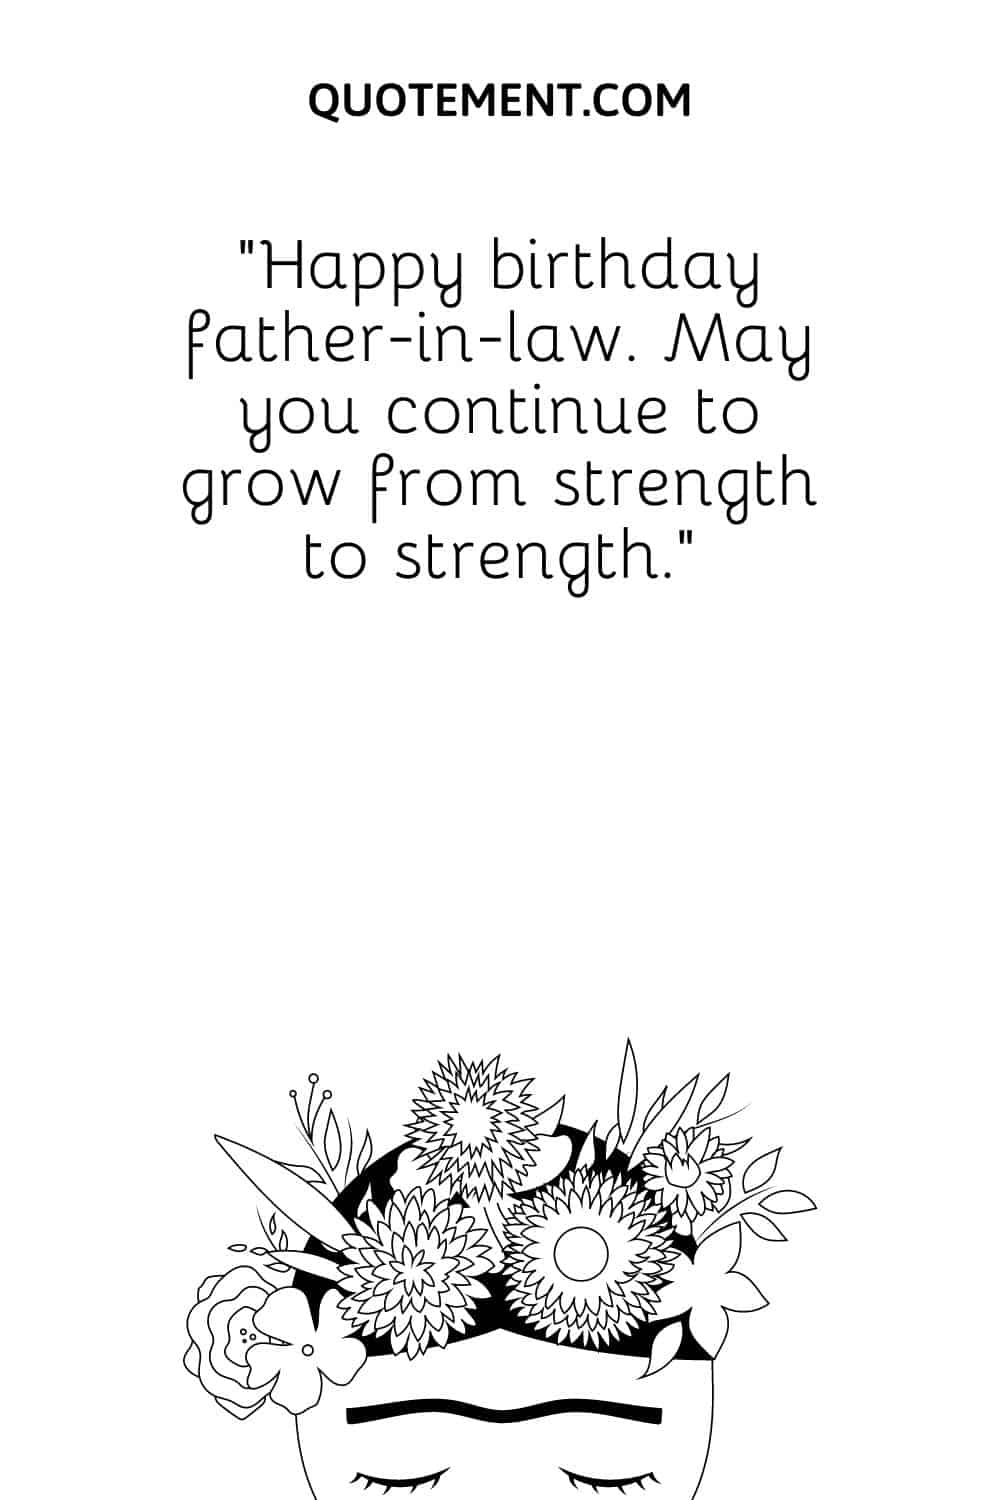 May you continue to grow from strength to strength